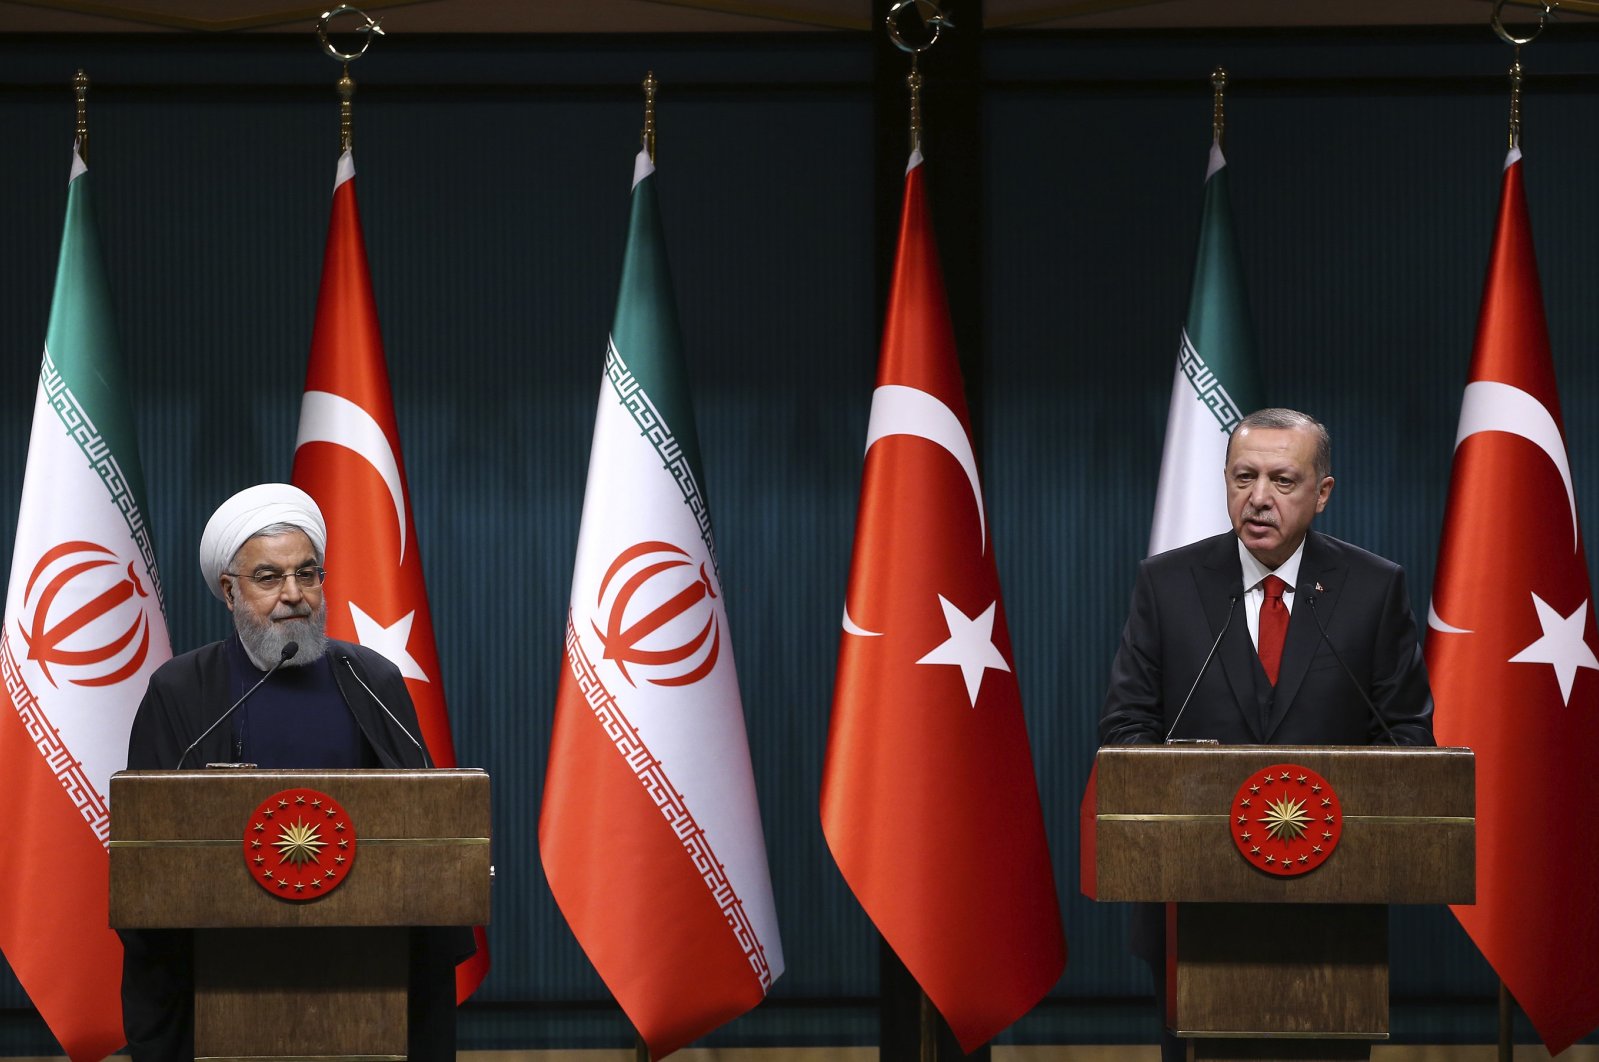 President Recep Tayyip Erdoğan (R) and his Iranian counterpart Hassan Rouhani hold a joint press conference in capital Ankara, Turkey, Dec.21, 2018. (AA)

